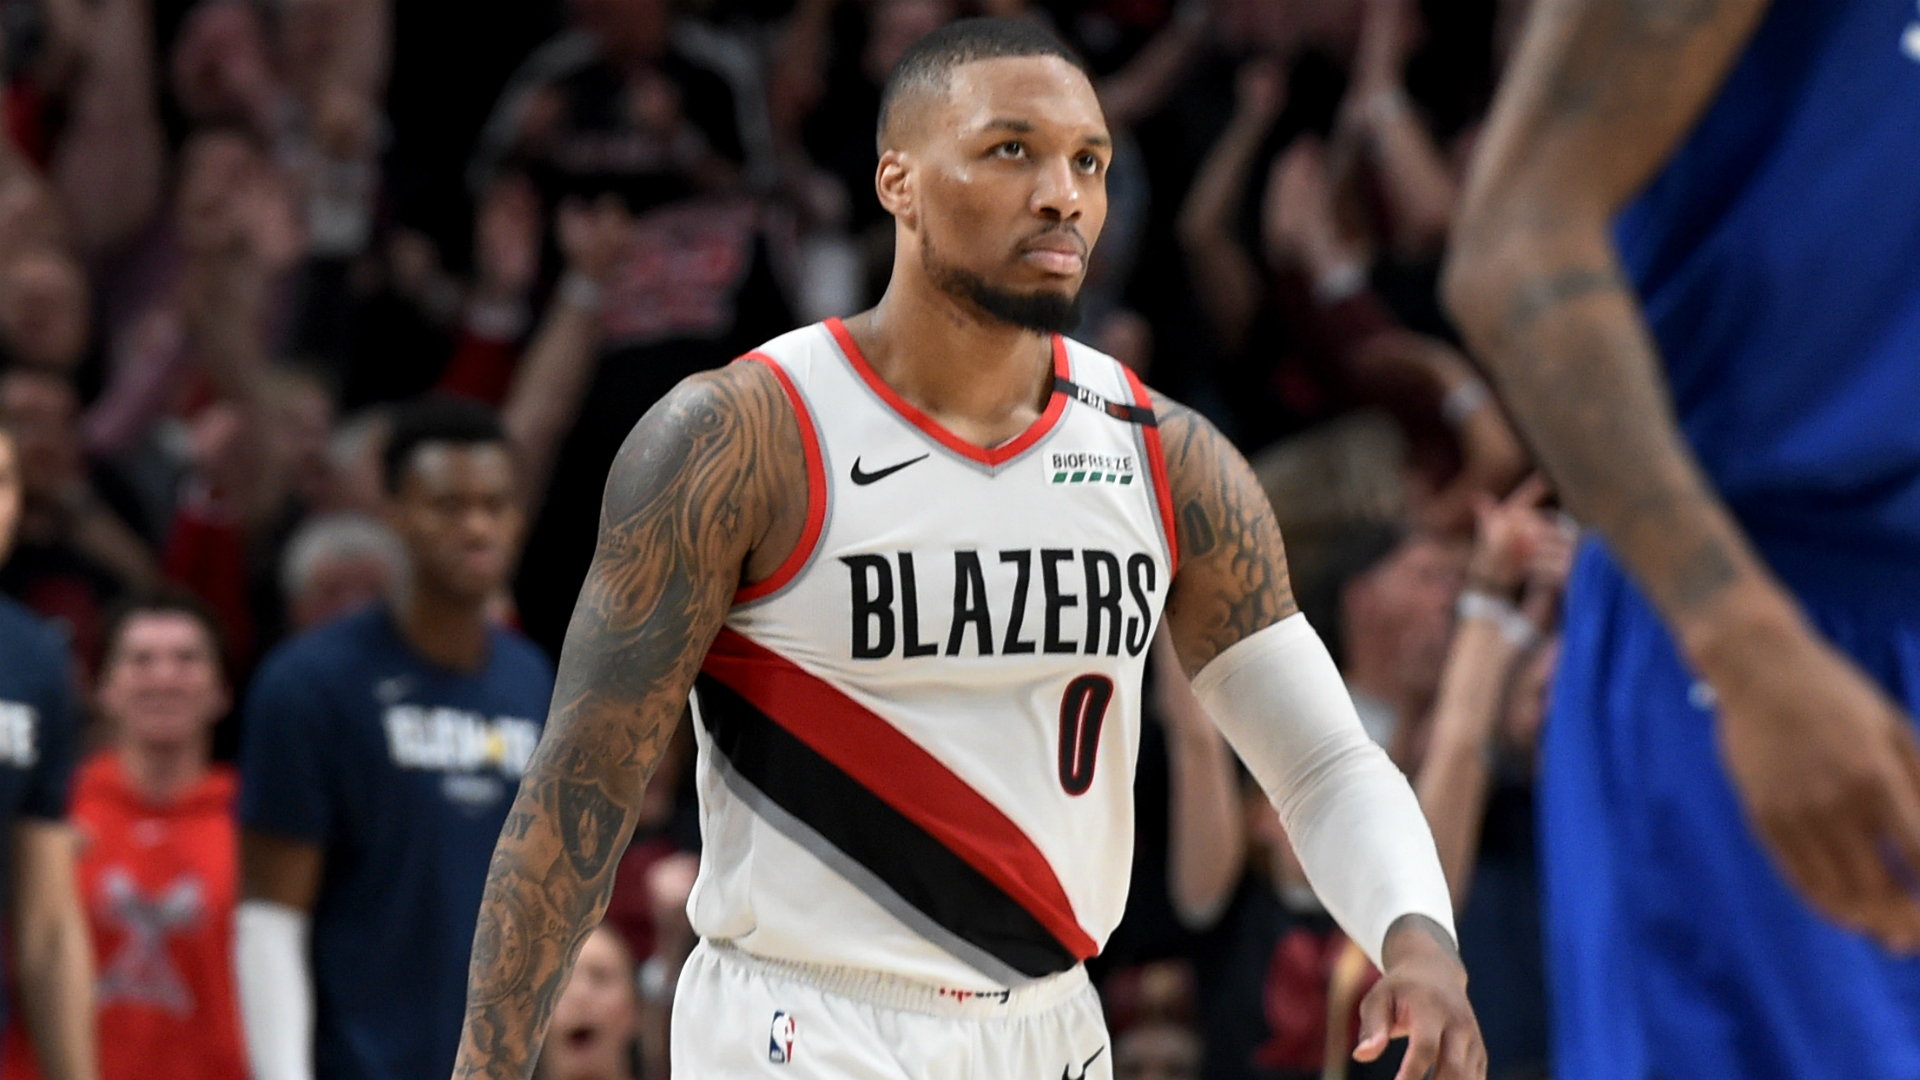 As others form super teams, Damian Lillard wants to continue starring for the Portland Trail Blazers.